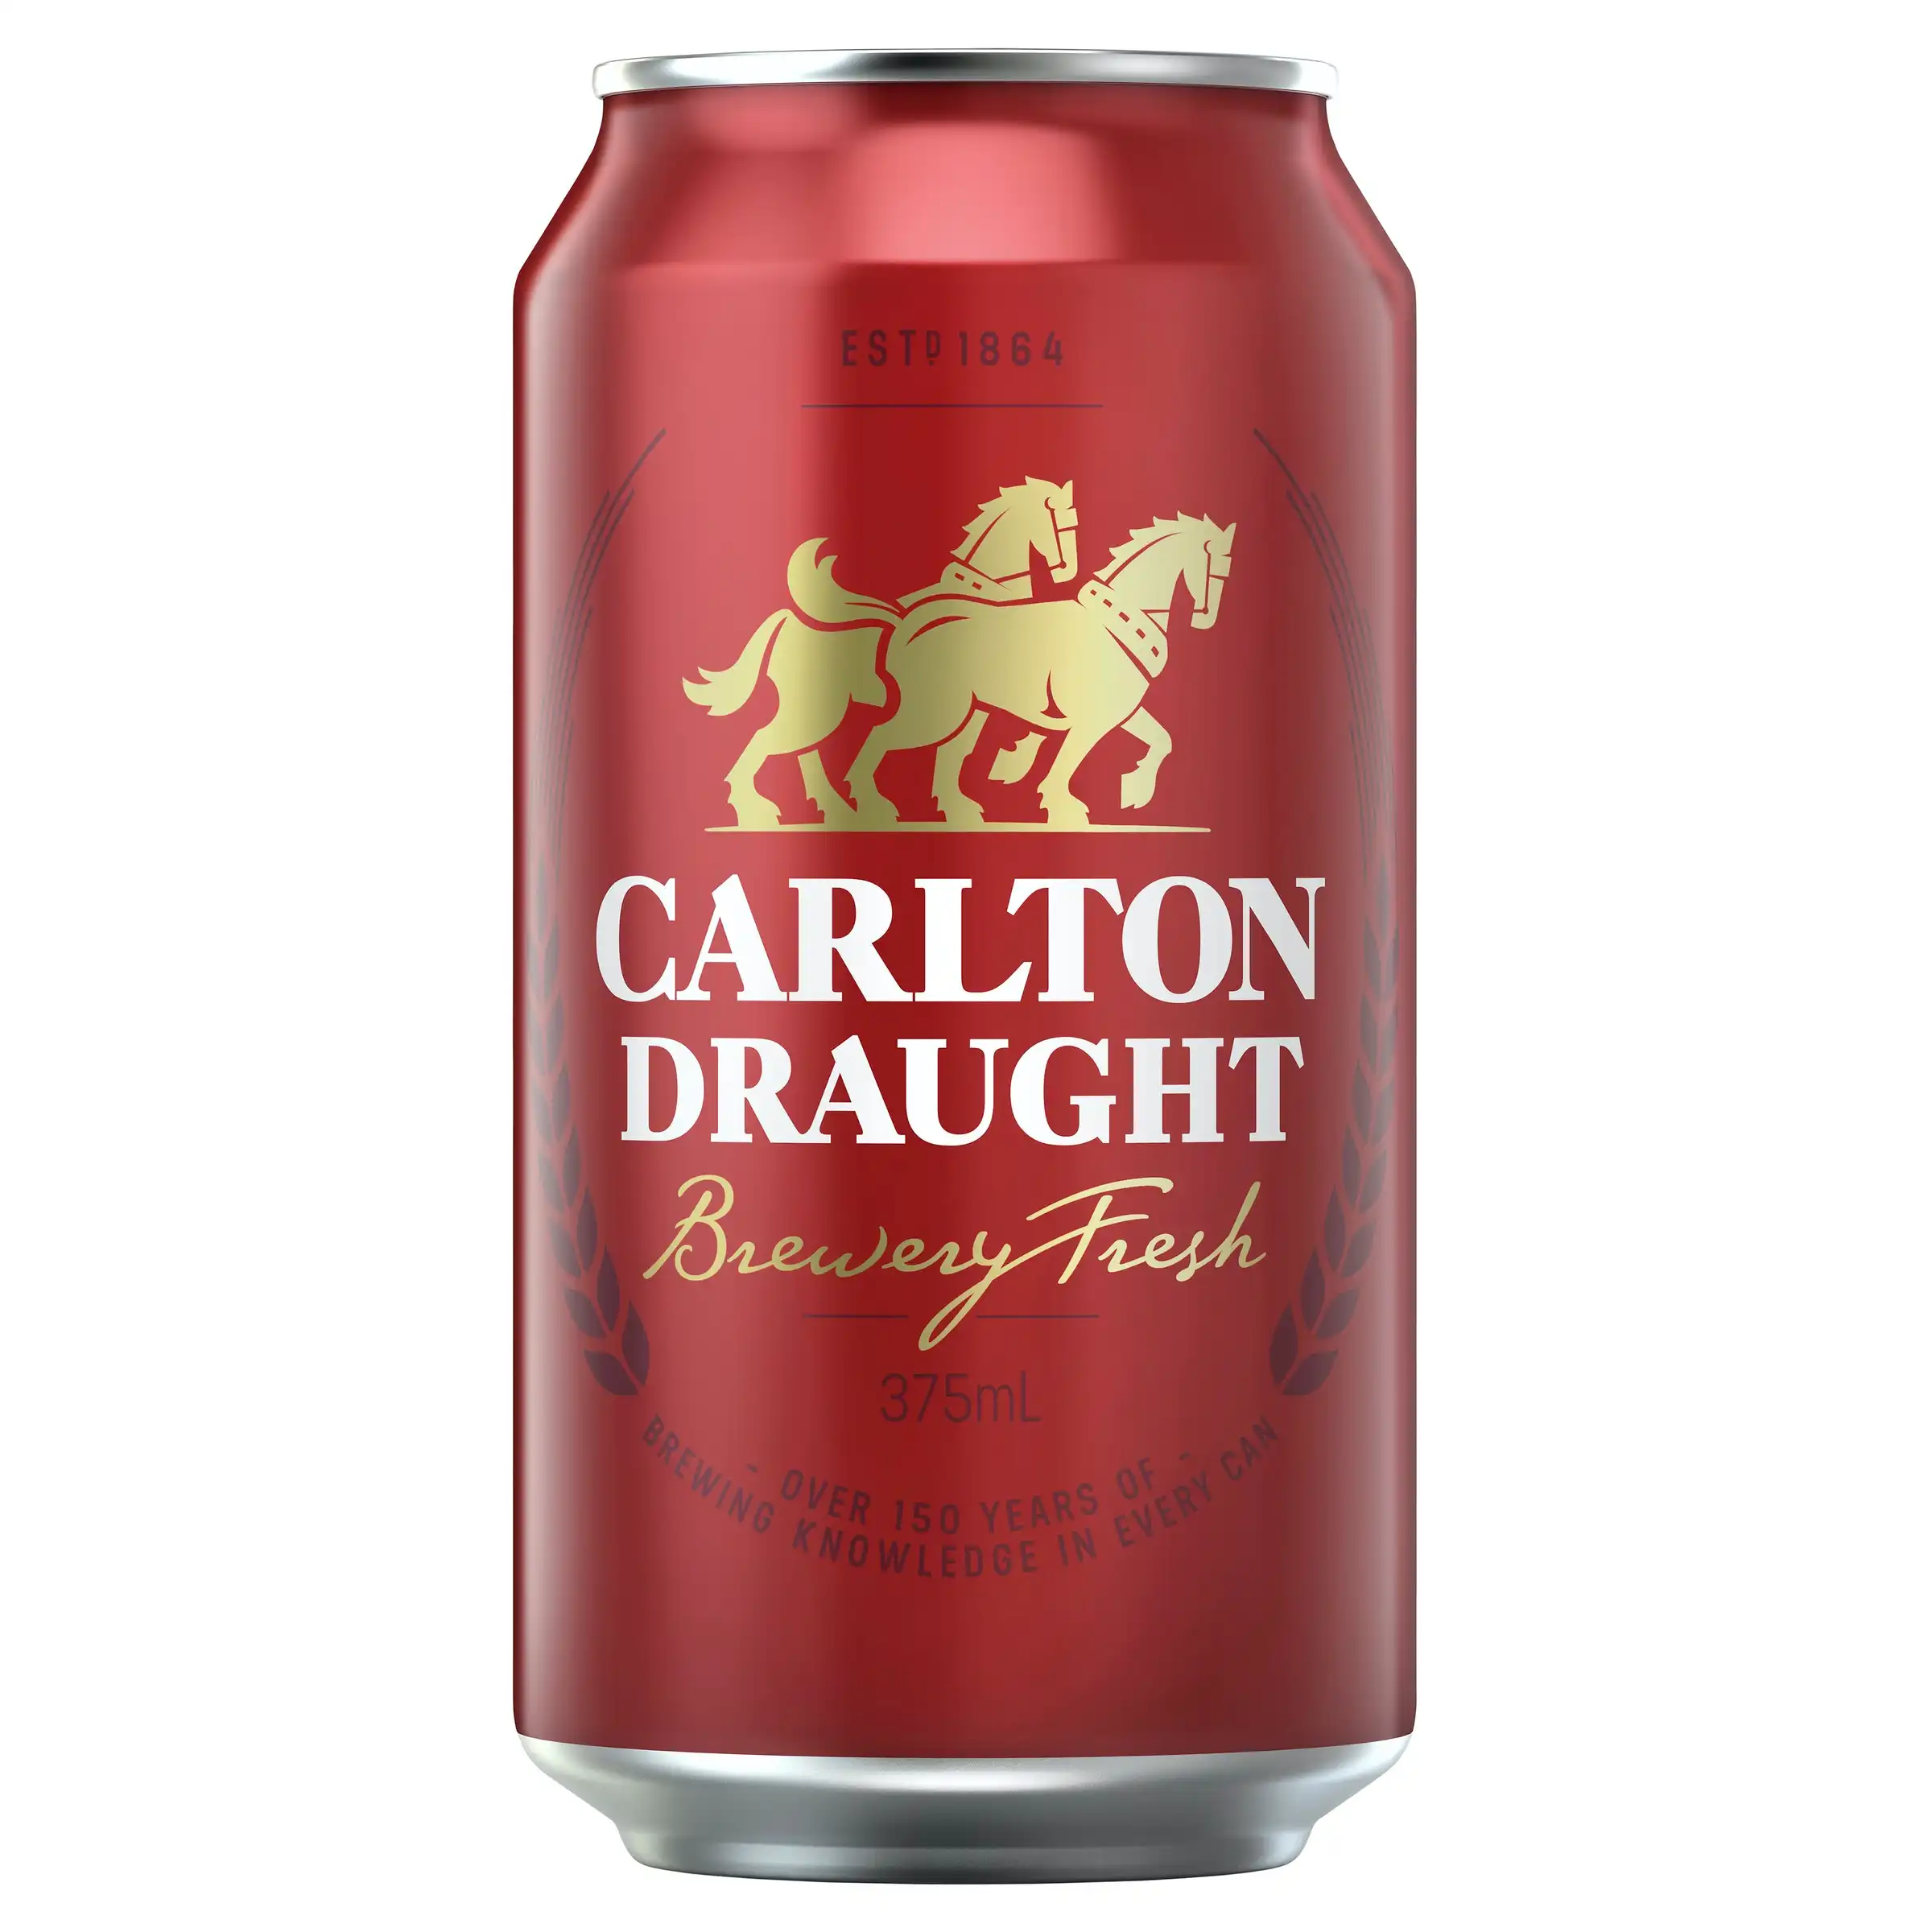 Carlton Draught Beer Case 24 x 375ml Cans